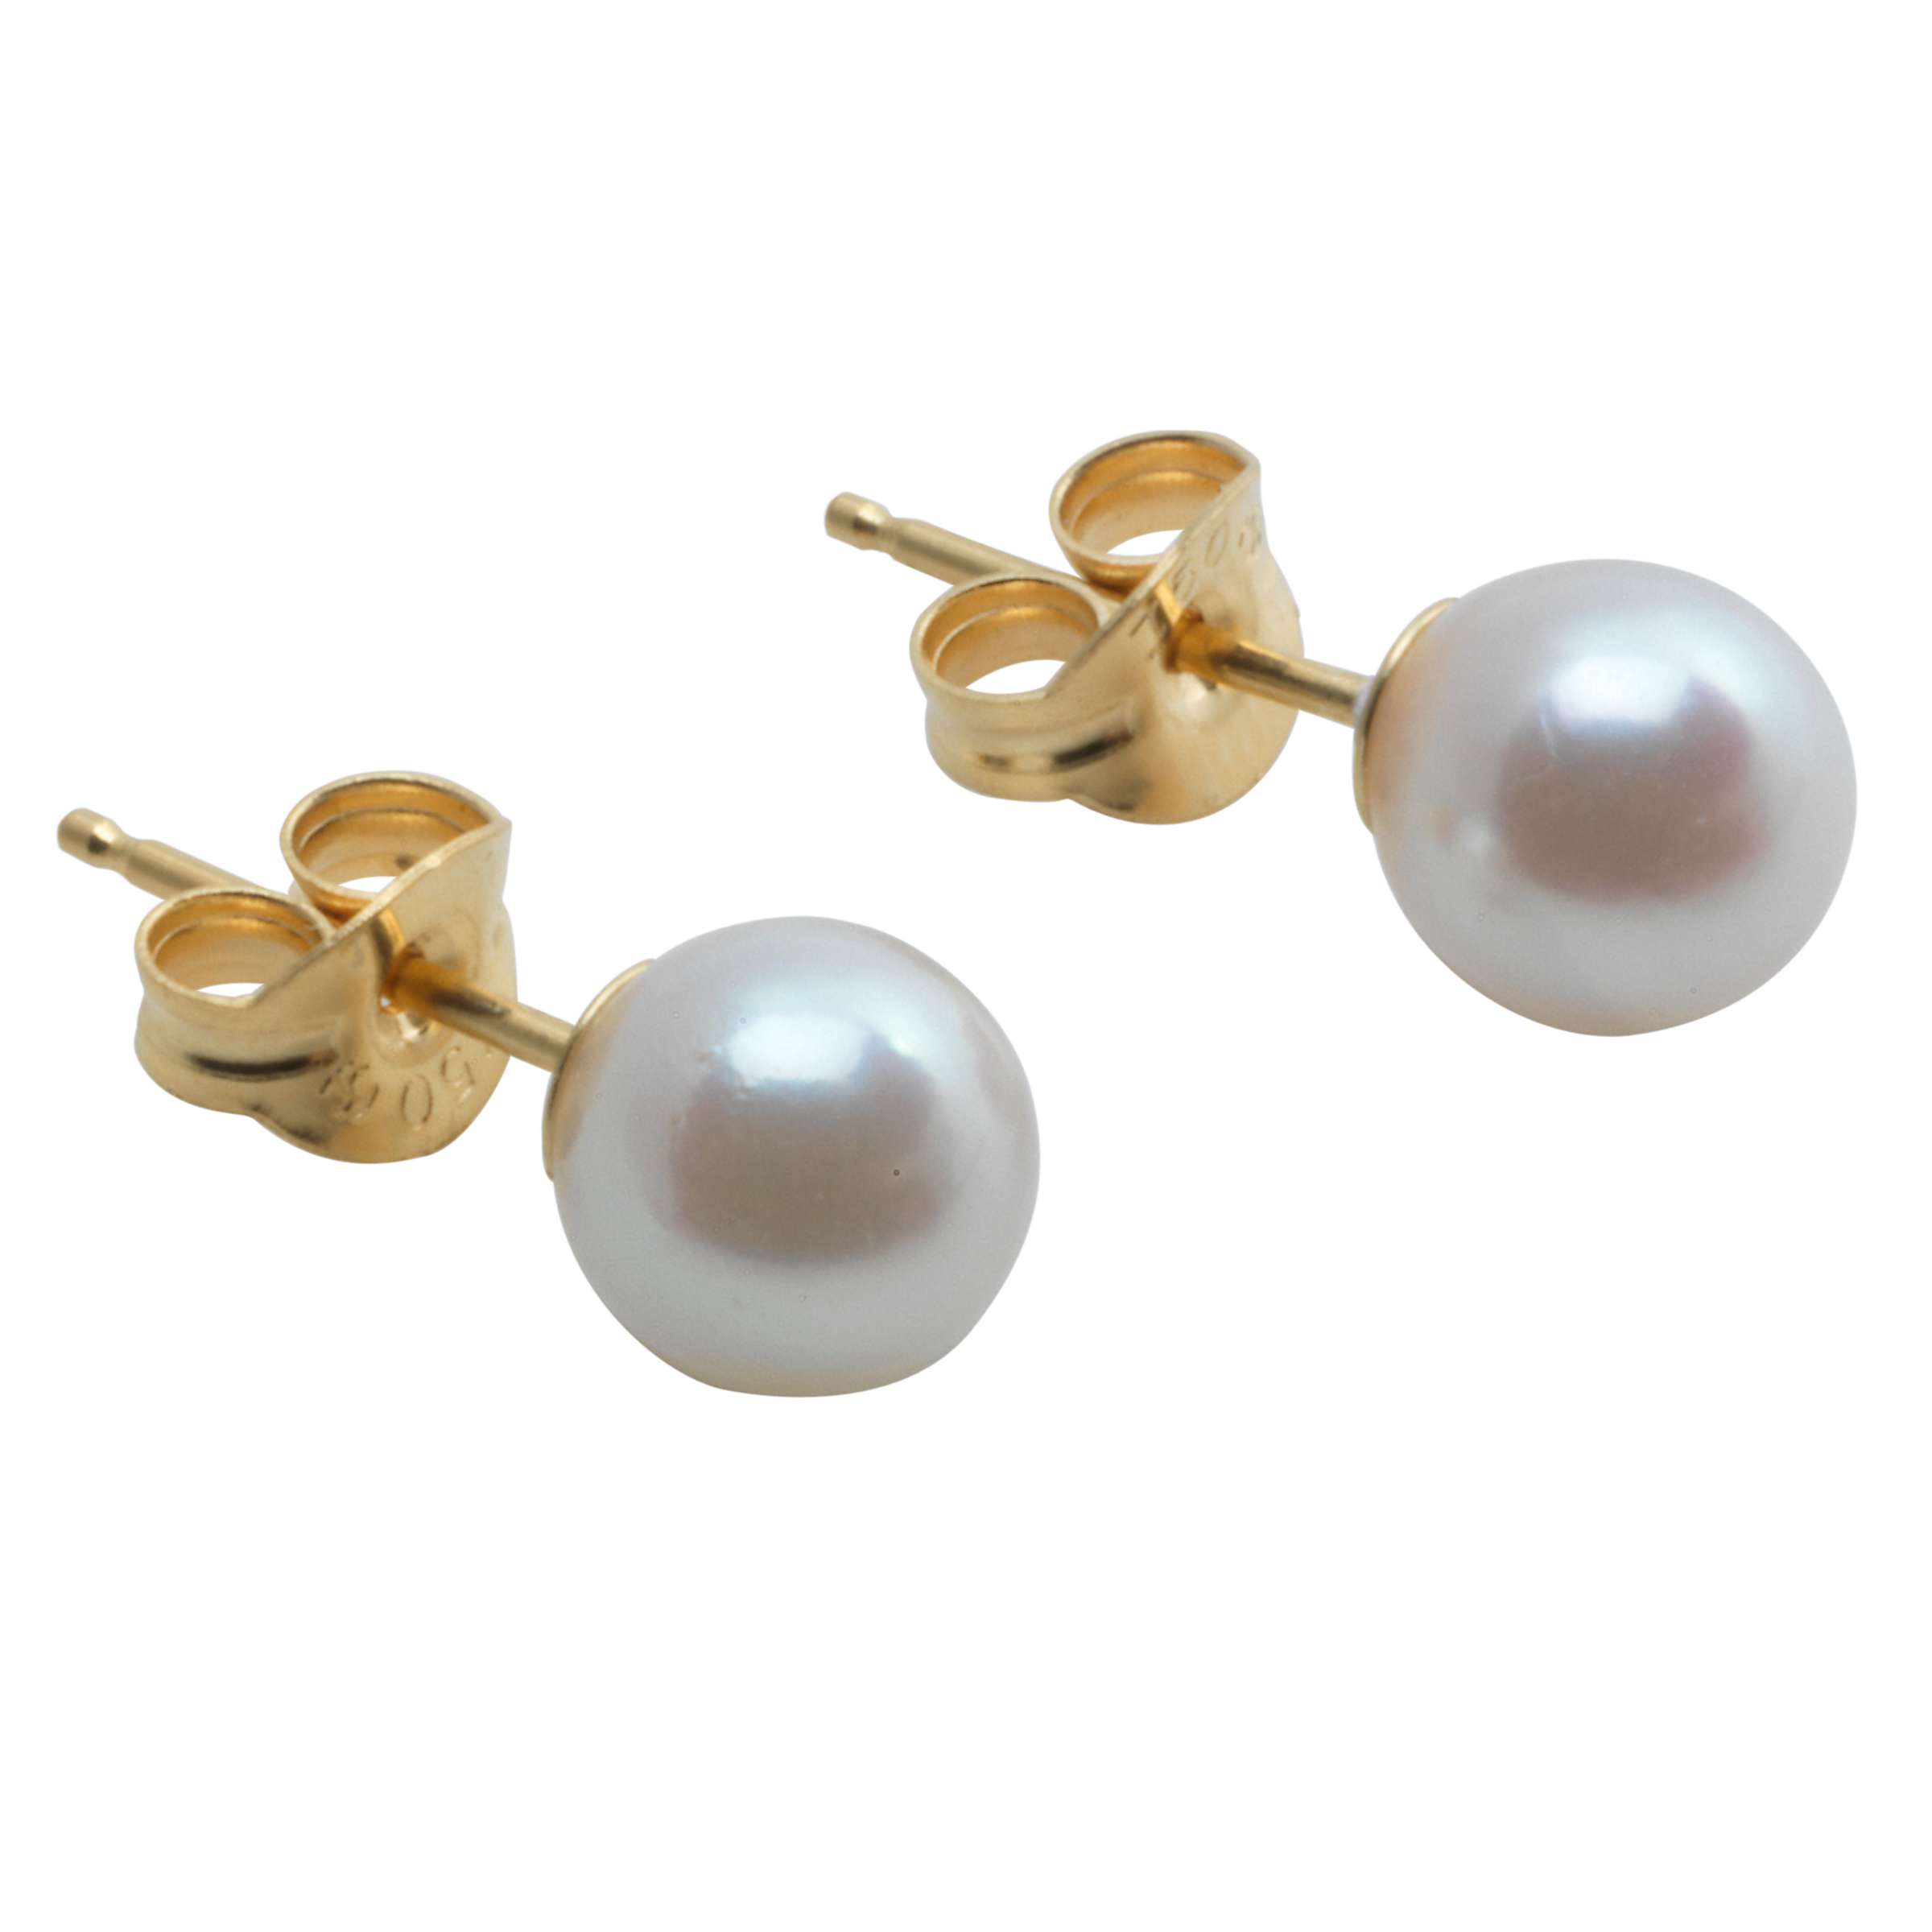 Buy A B Davis Cultured Small White Pearl Stud Earrings Online at johnlewis.com